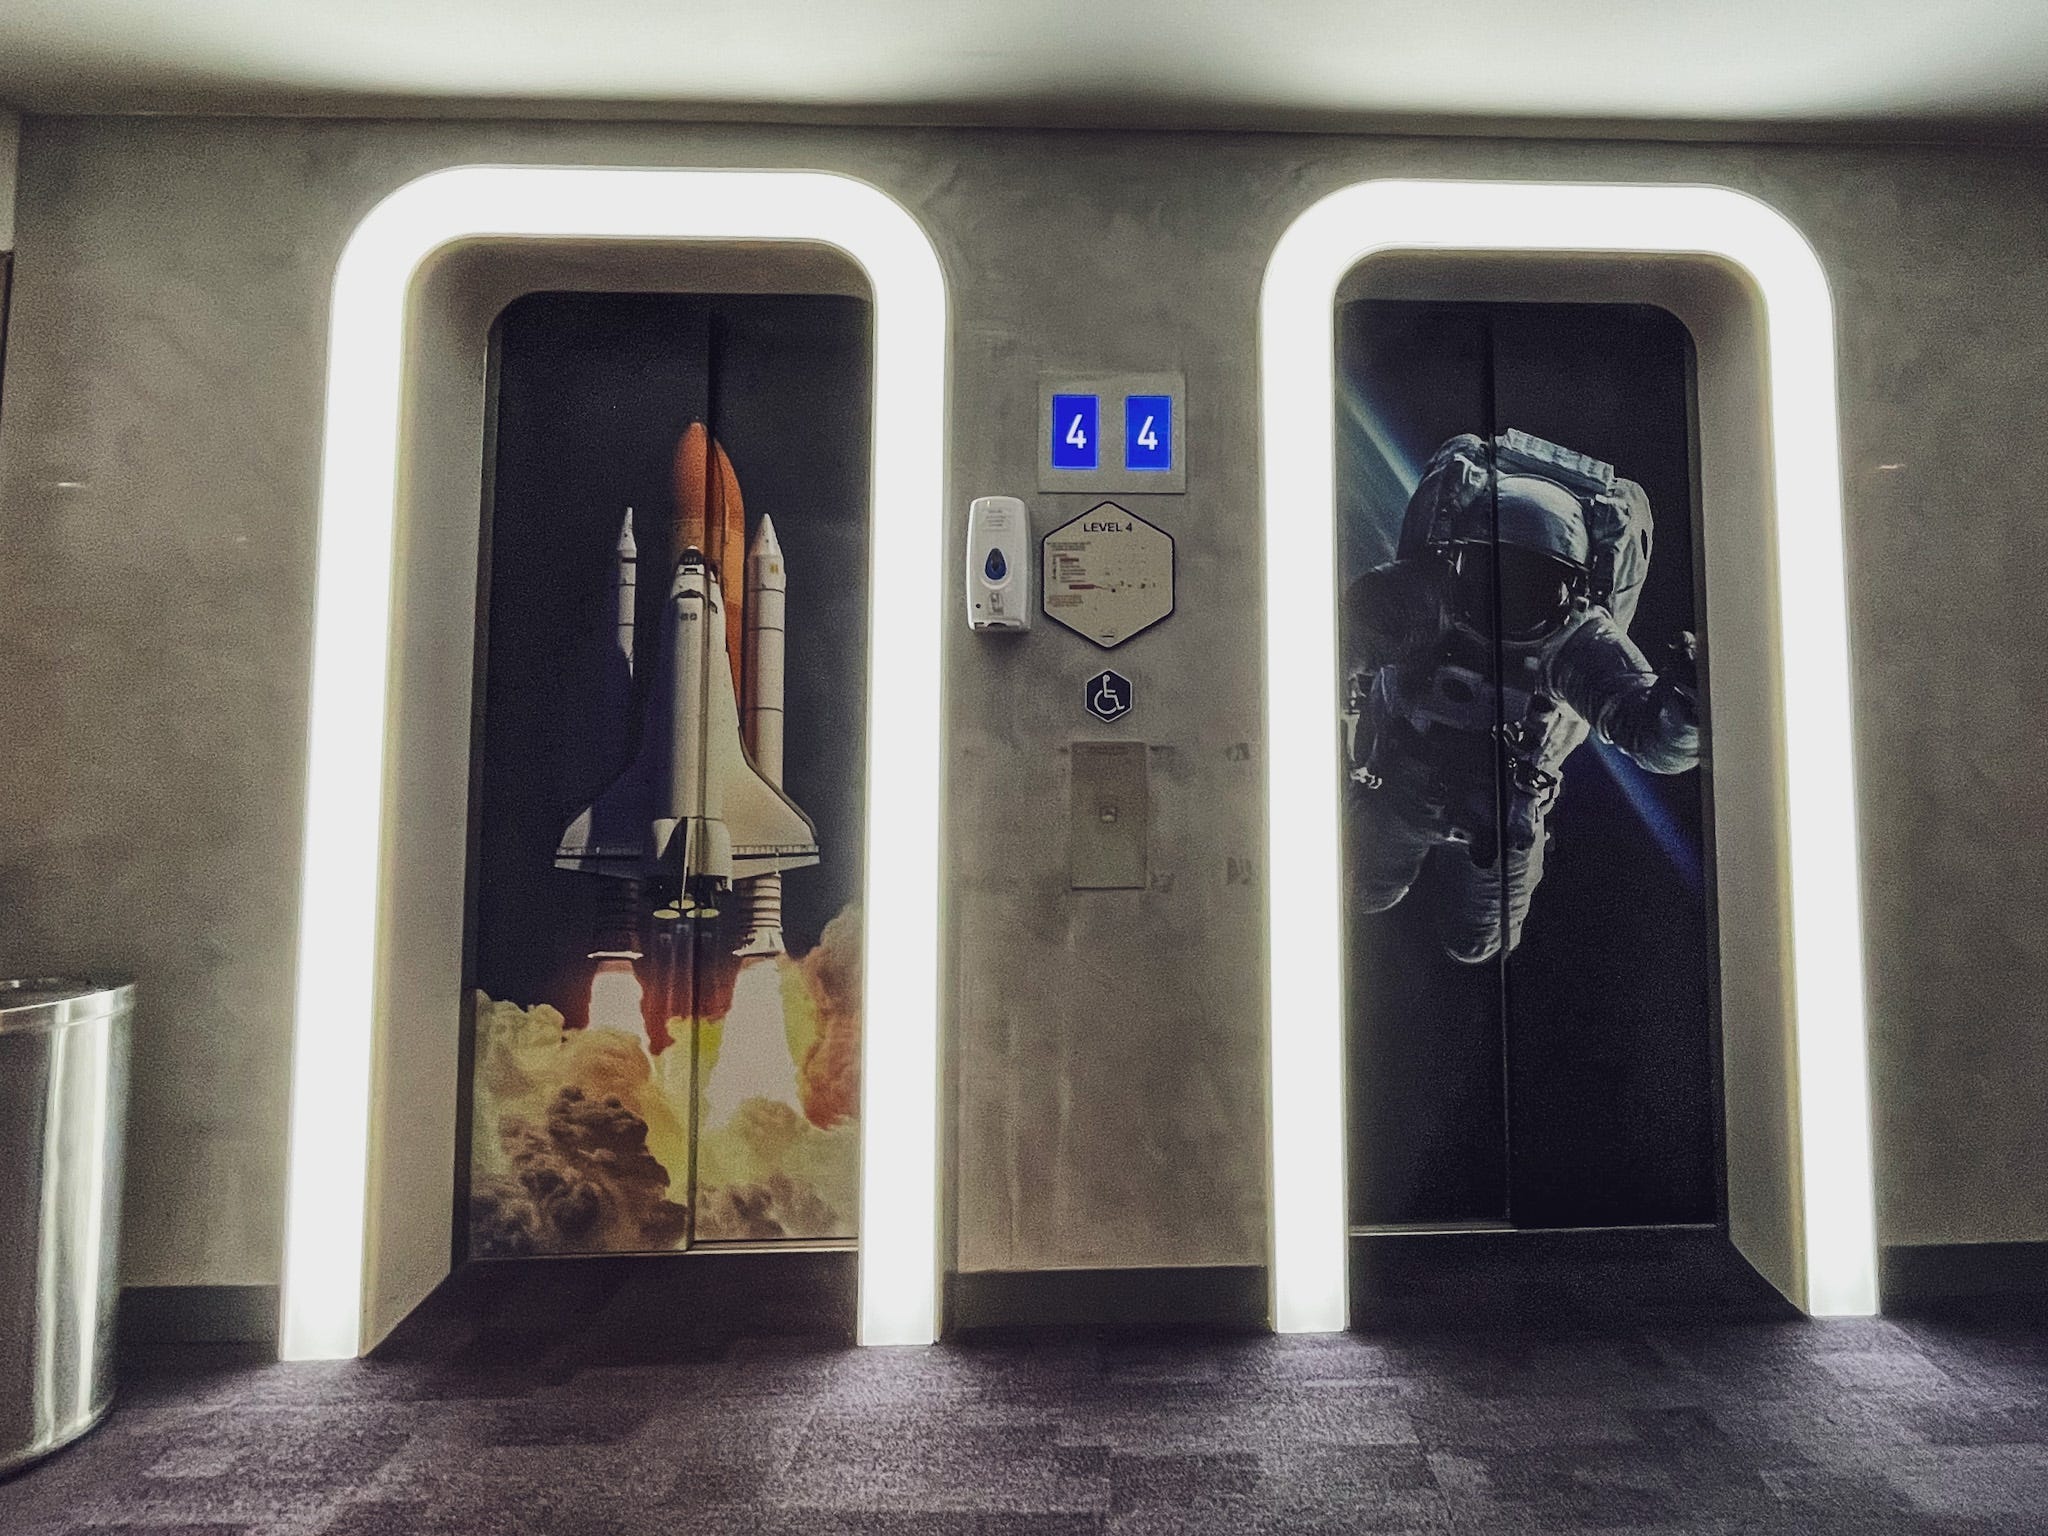 Space-themed elevators.